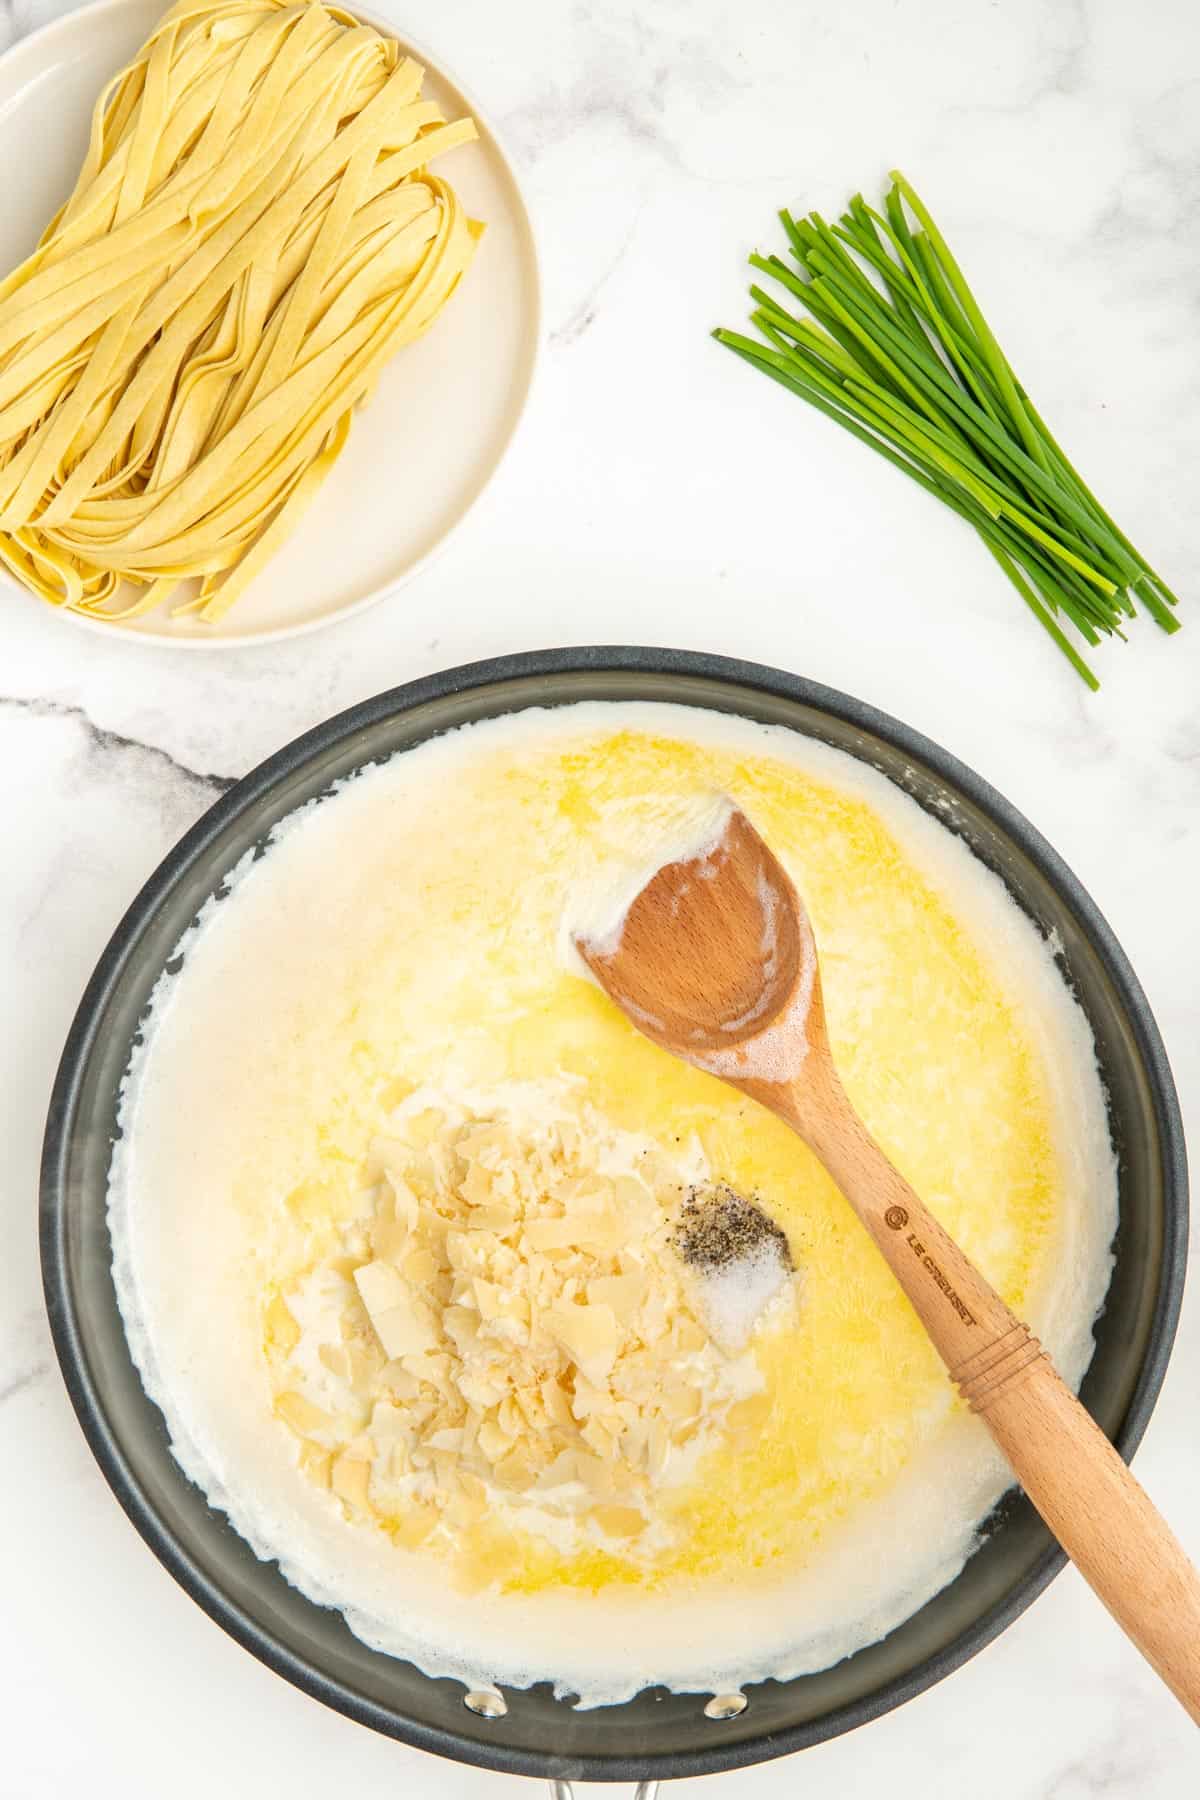 Parmesan cheese, salt, and pepper added to alfredo sauce in a non-stick frying pan.